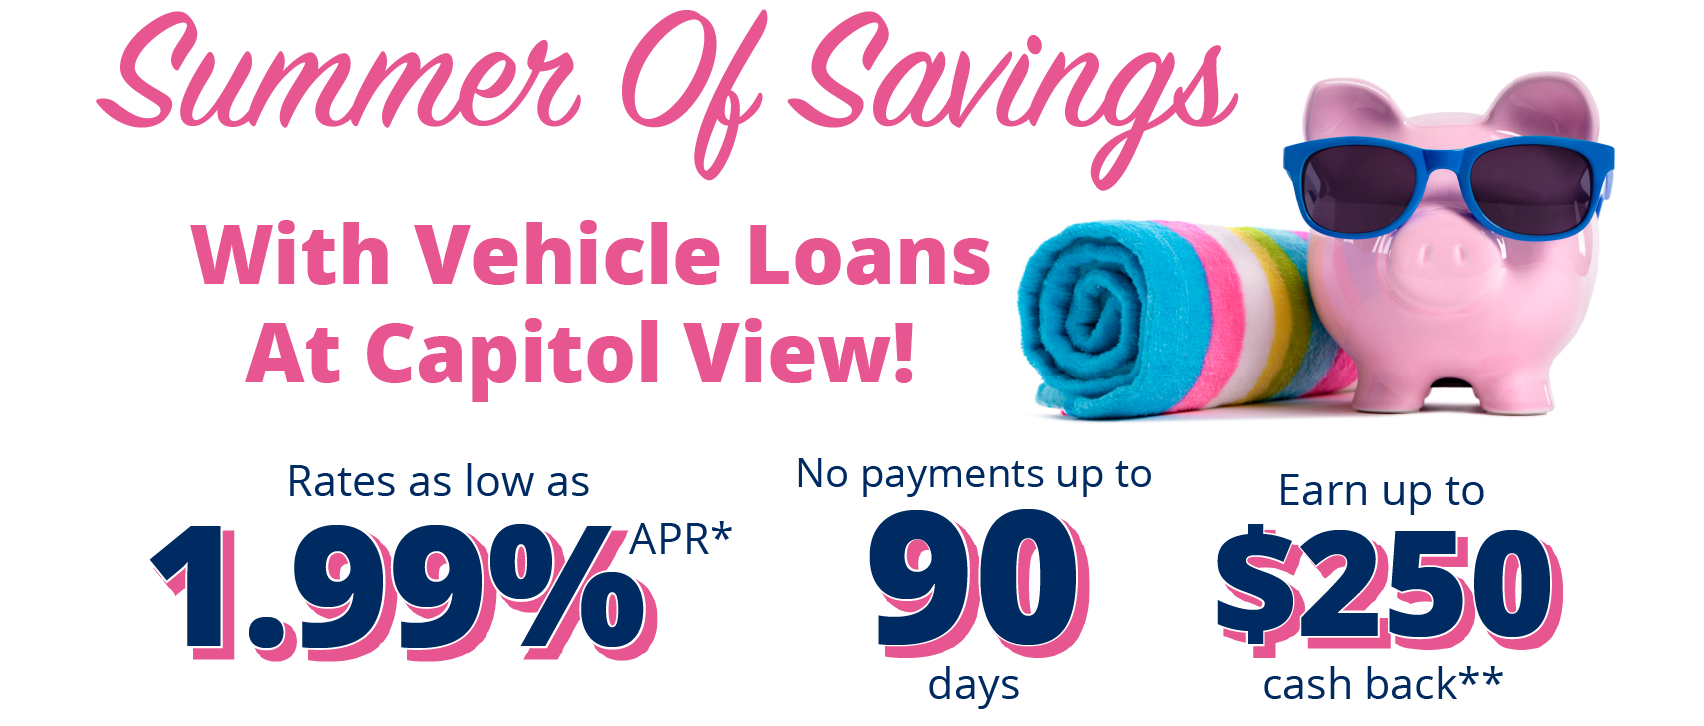 Summer of Savings with vehicle loans at capitol view! Rates as low as 1.99% APR*. No Payments up to 90 days. Earn up to $250 cash back**. See offer details below.